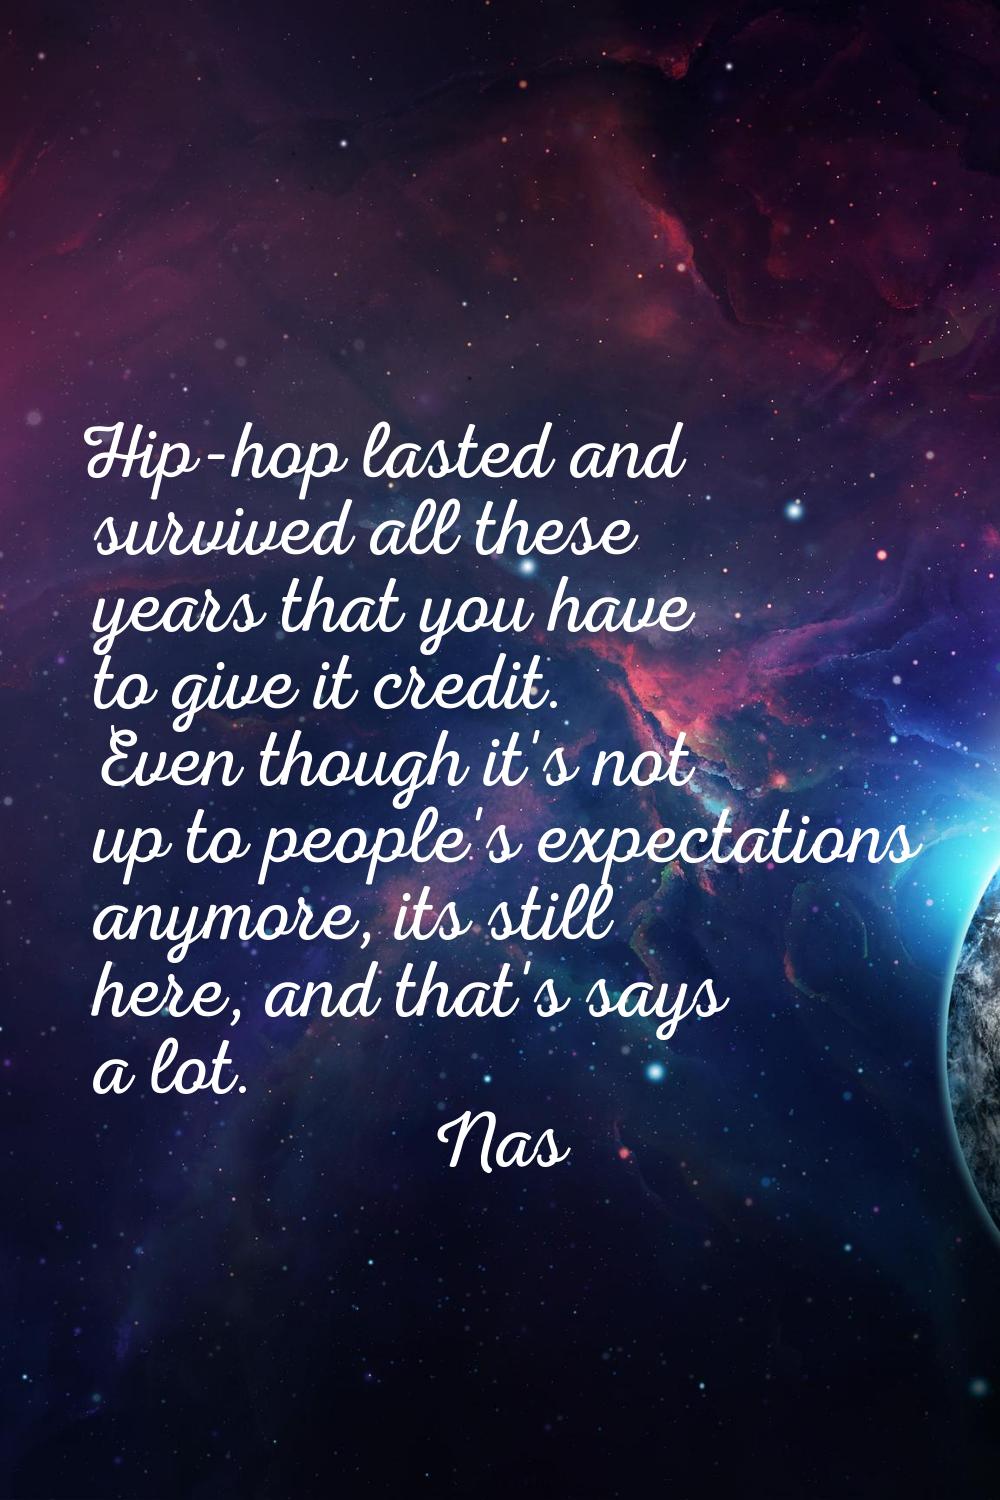 Hip-hop lasted and survived all these years that you have to give it credit. Even though it's not u